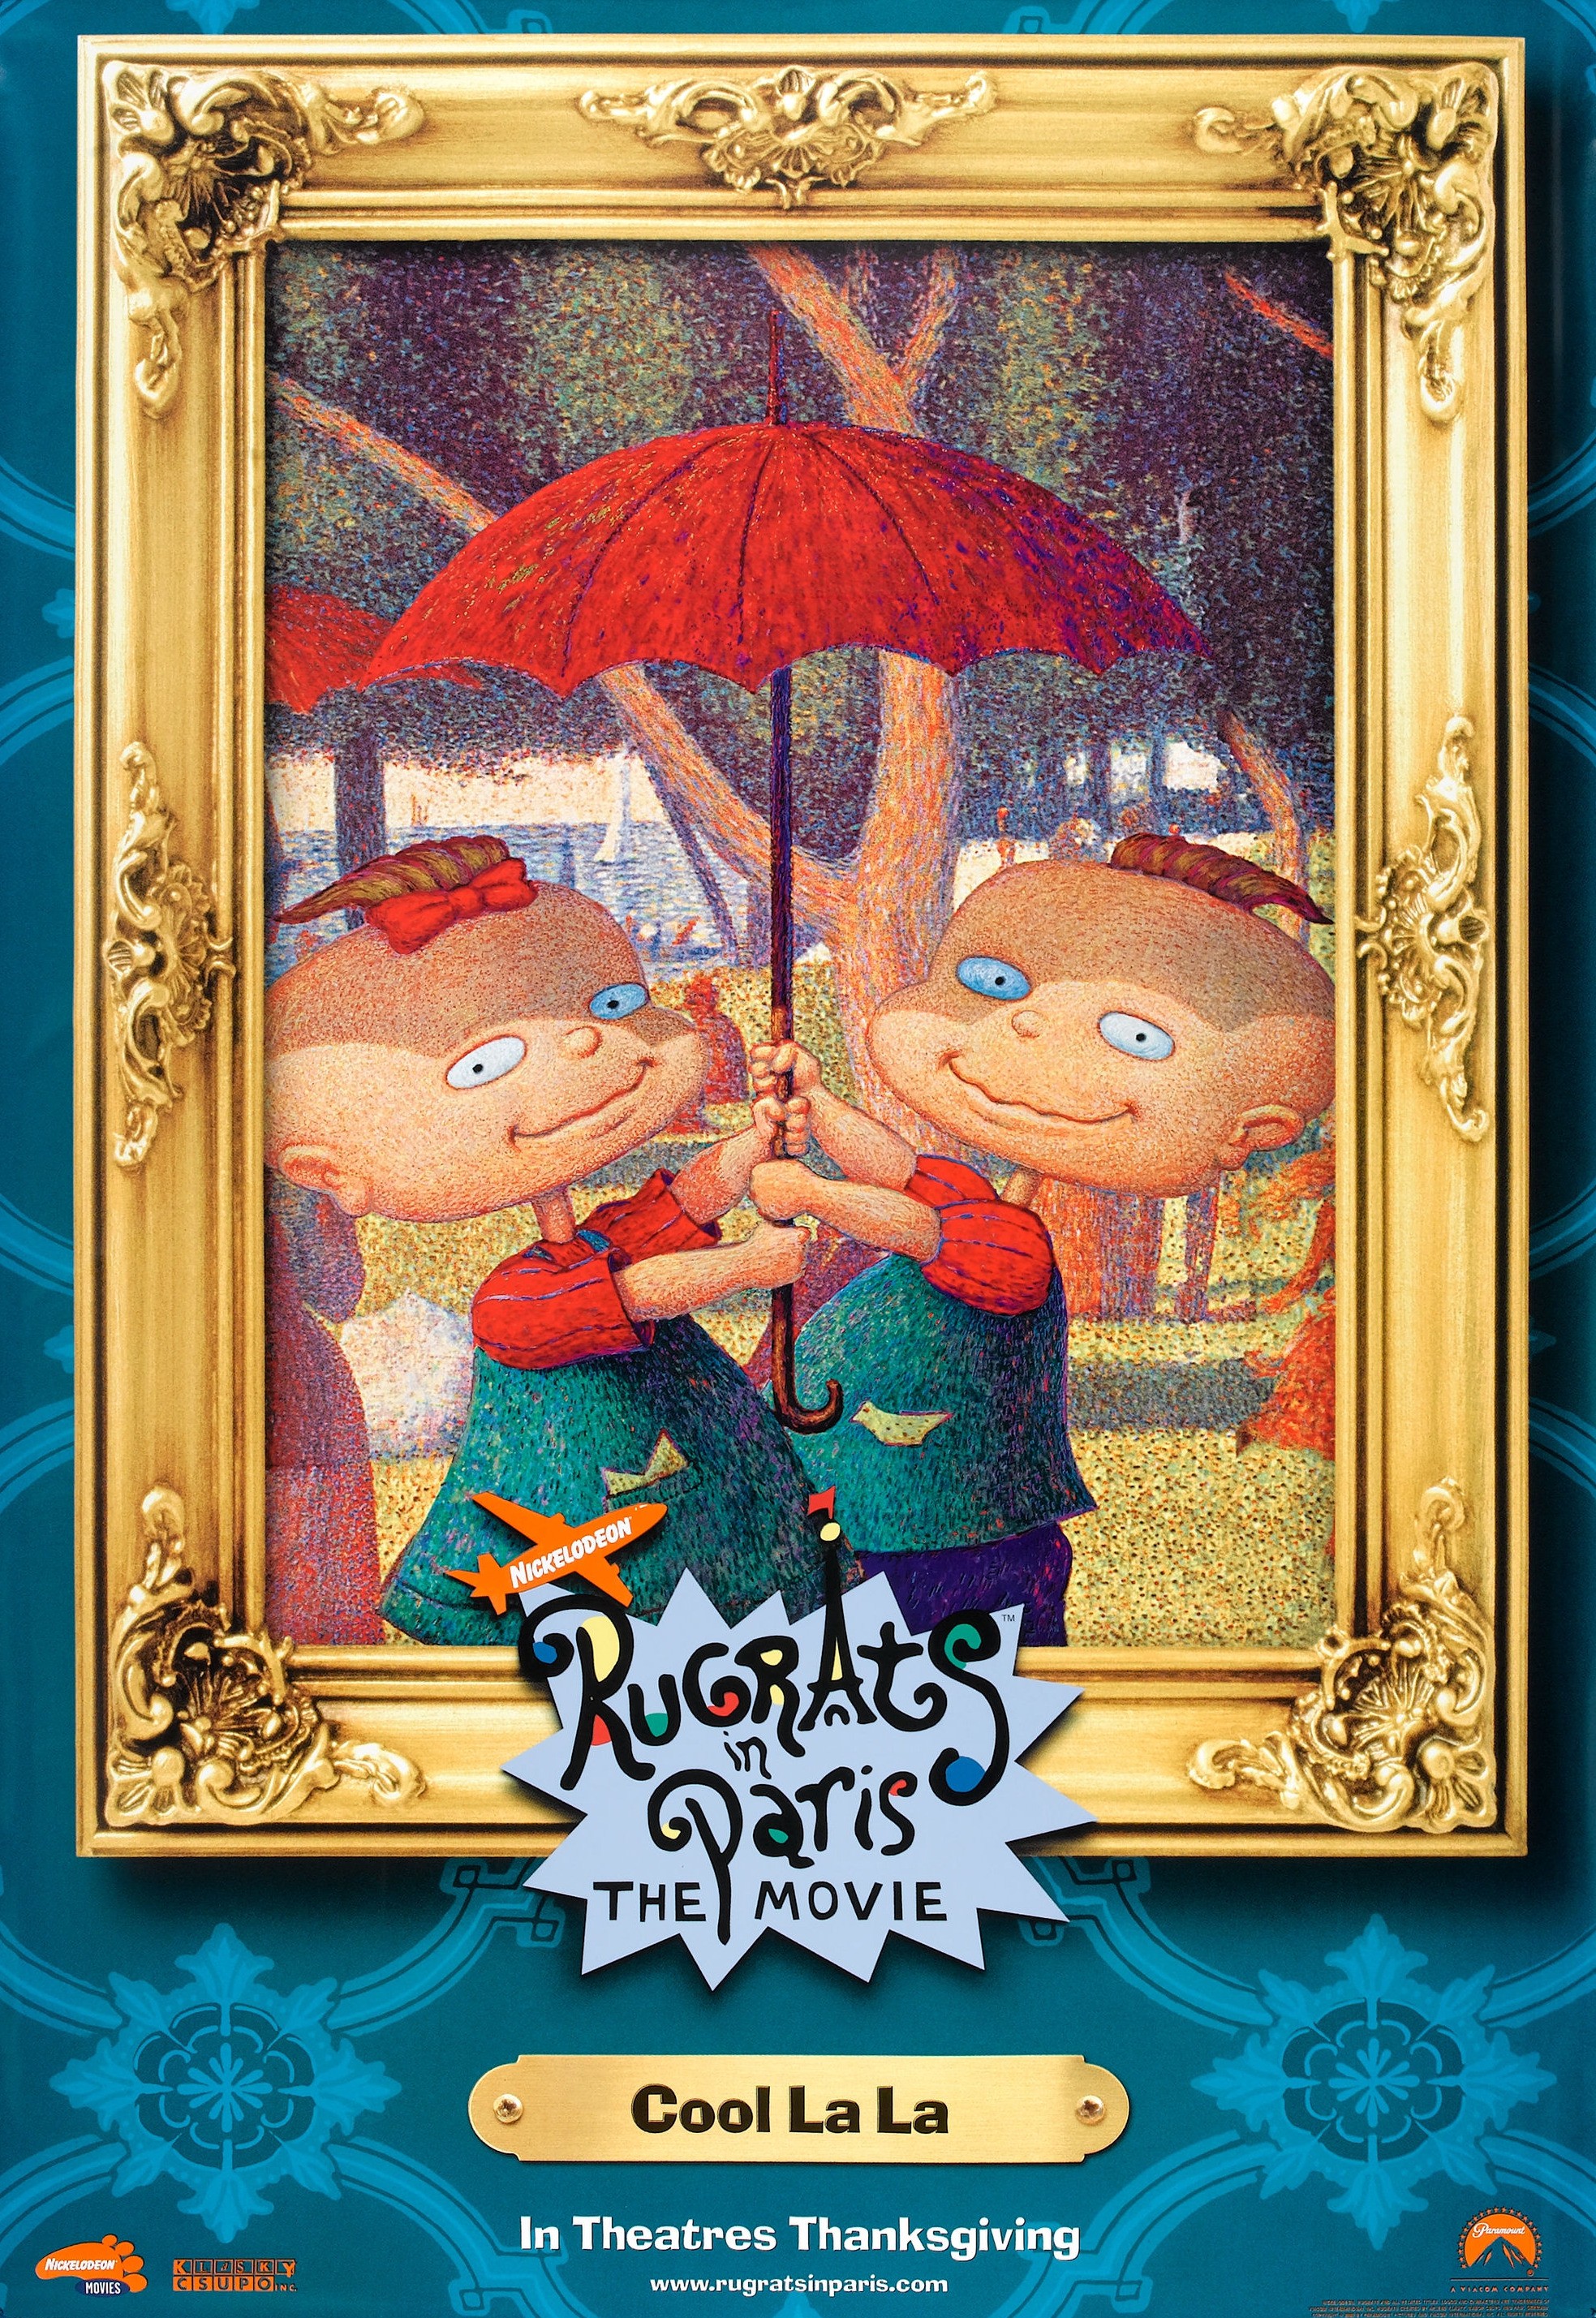 for Rugrats in Paris: The Movie (#4 of 8). Return to the main poster page f...